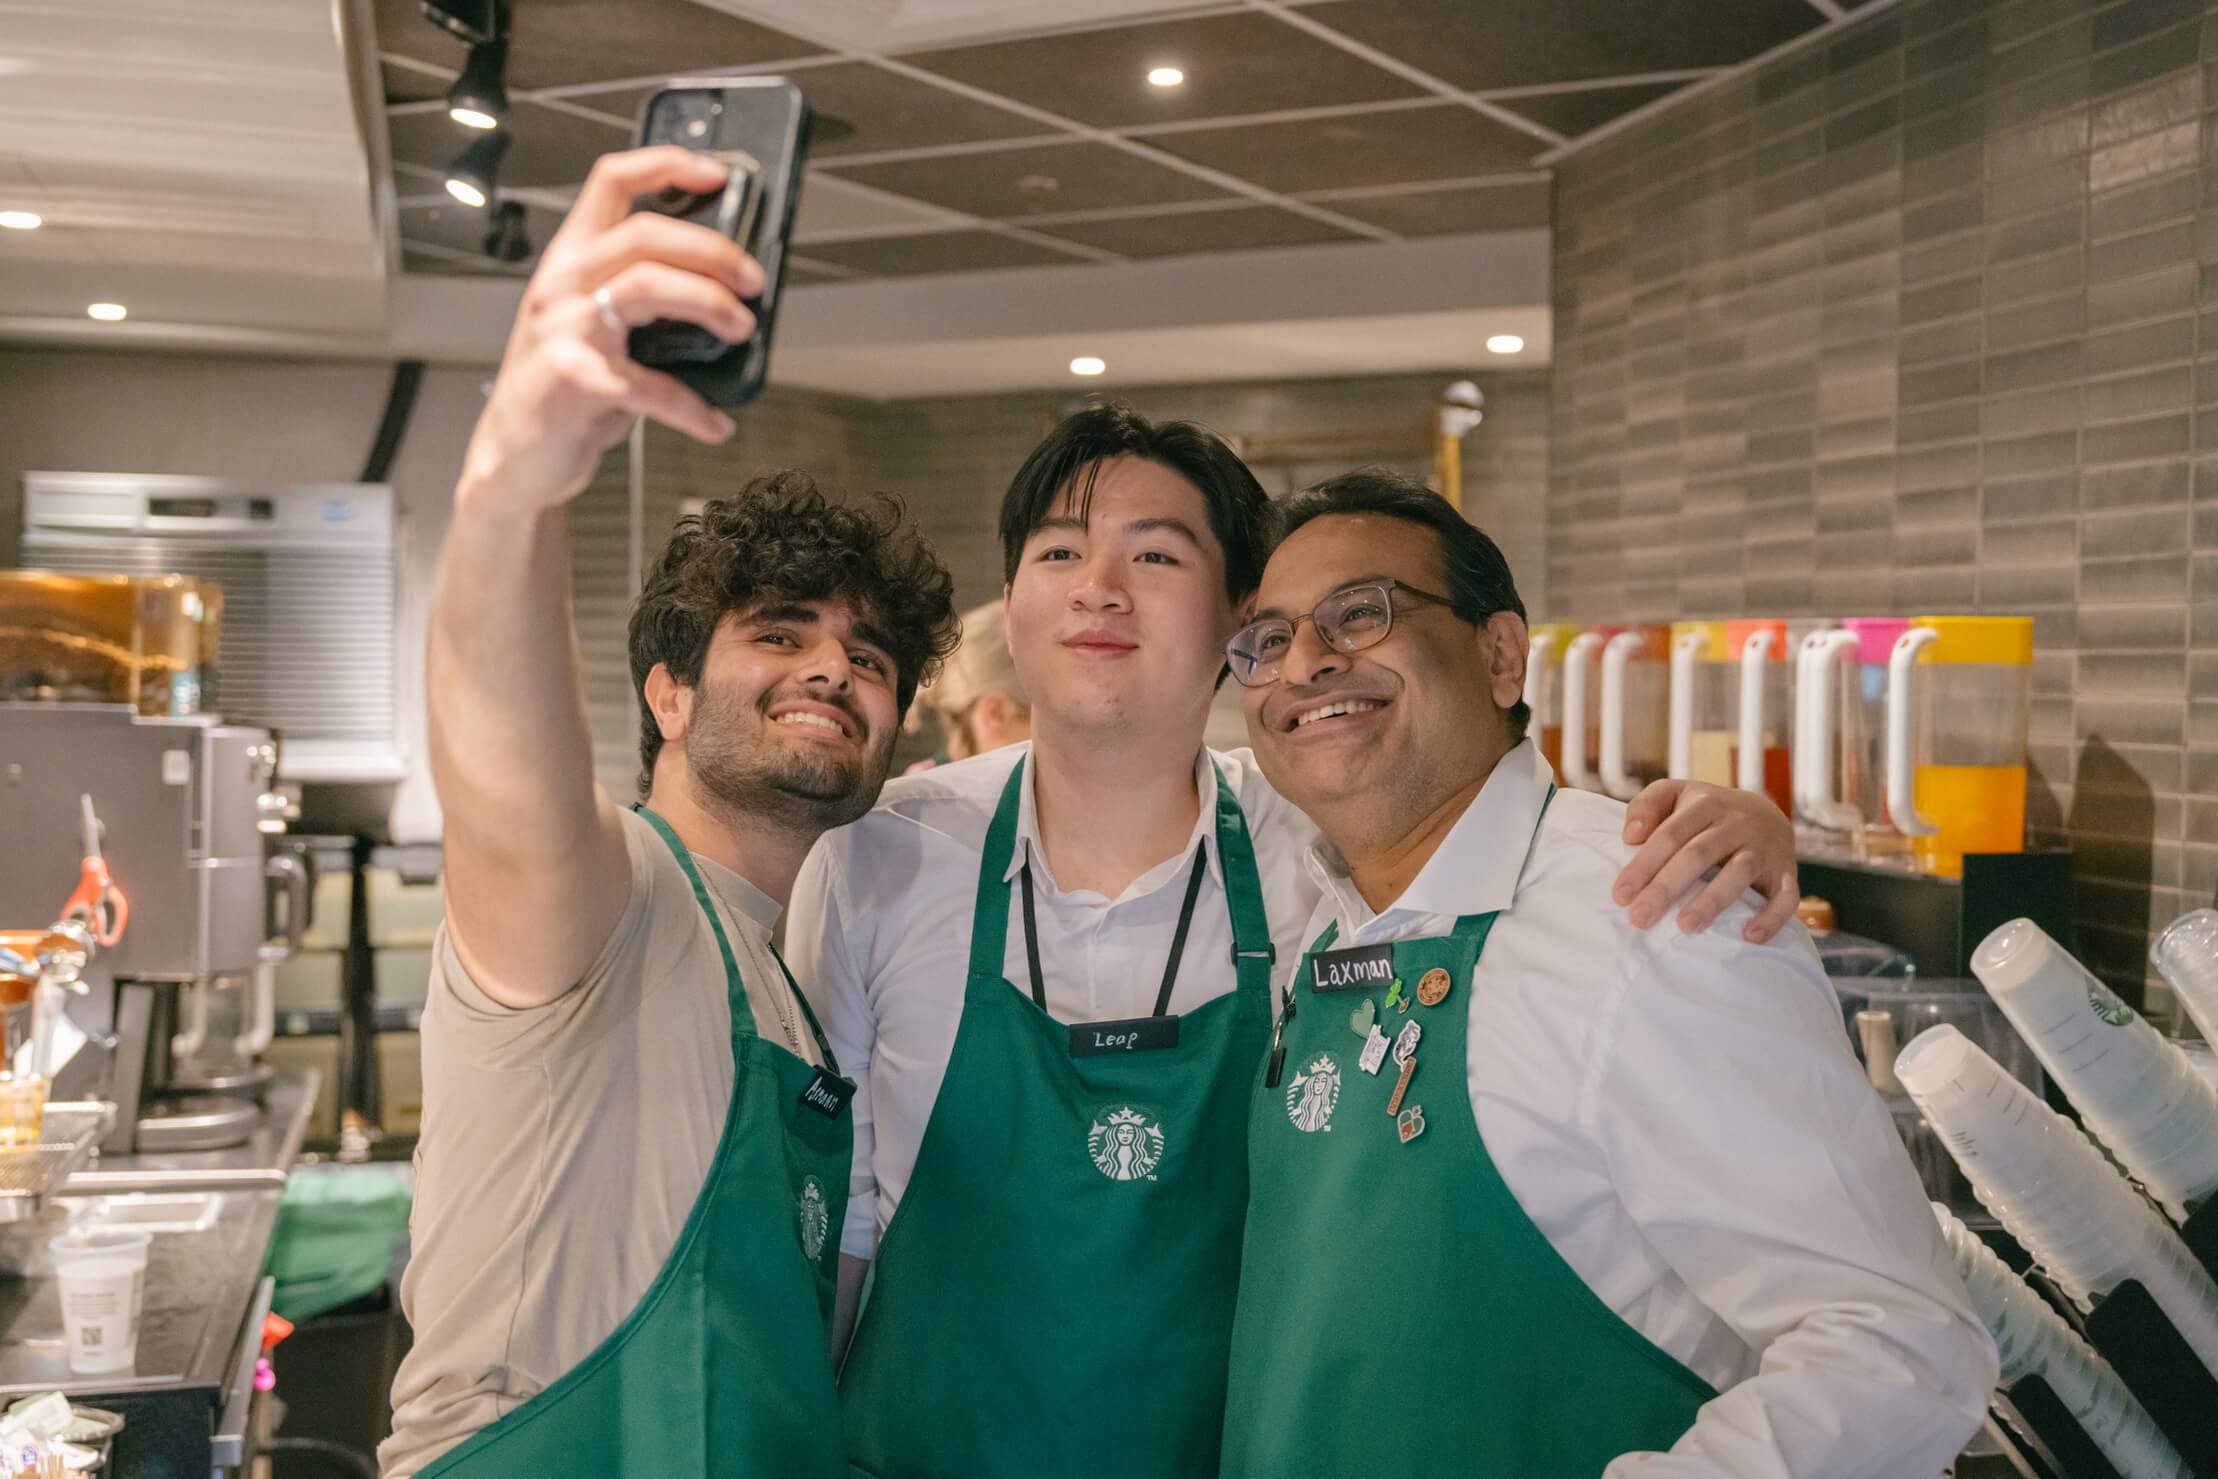 Two people in green aprons pose with Starbucks CEO Laxman Narasimhan behind a counter, all smiling as they take a selfie with a smartphone.